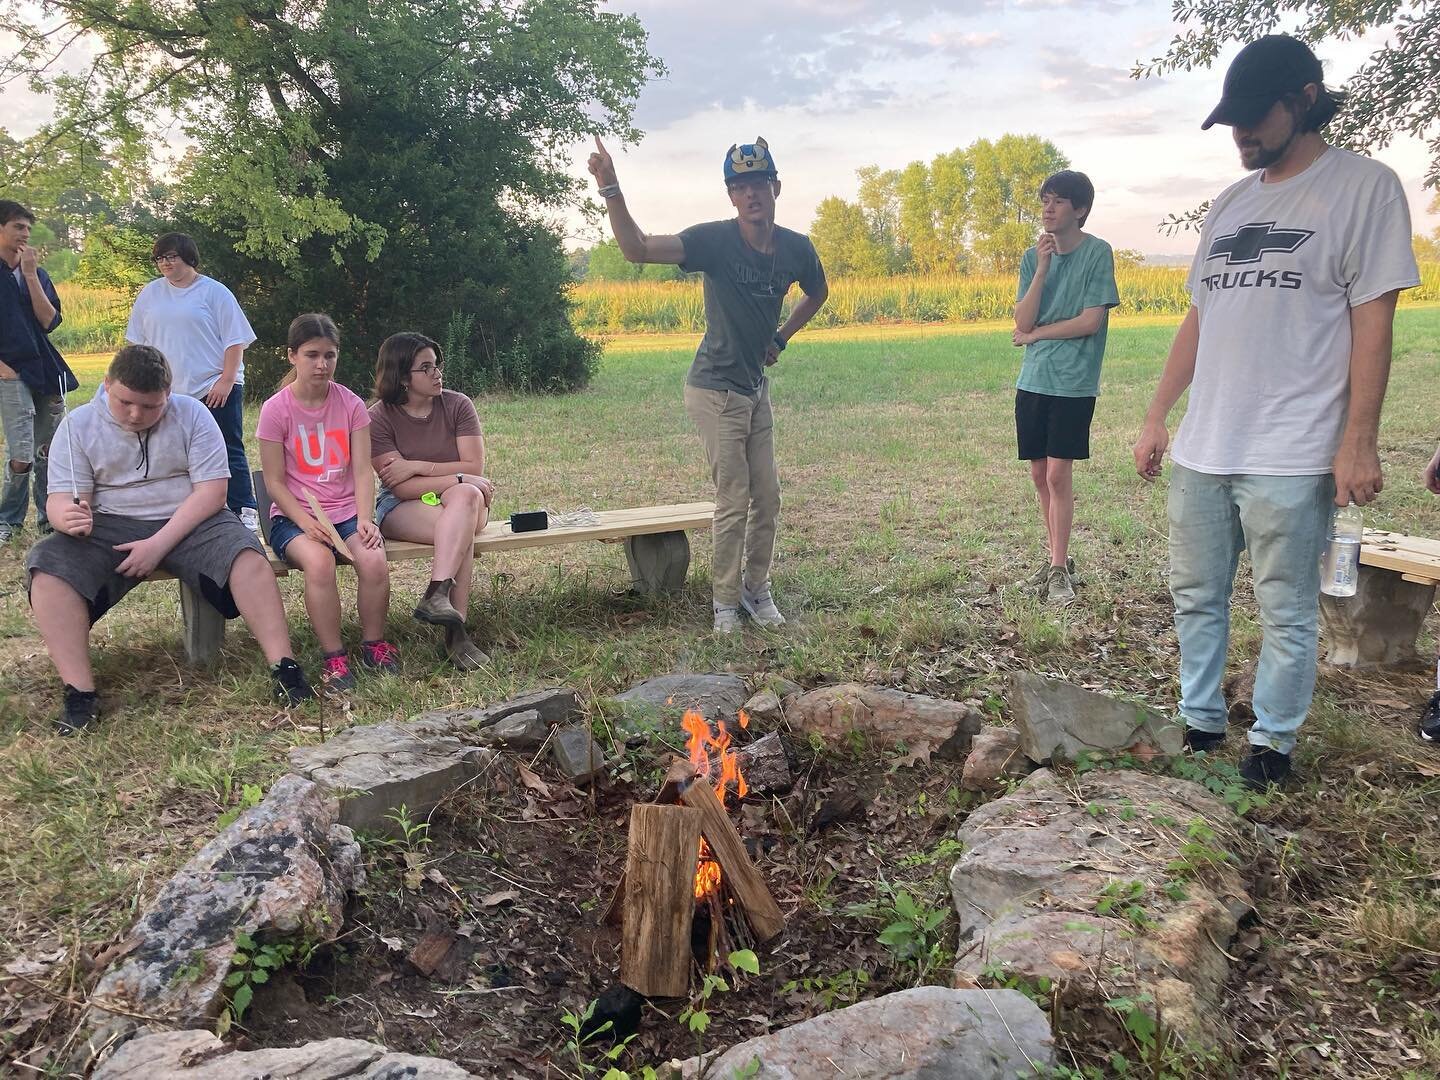 The last night of the first week is one to remember. It had a strong sense of nostalgia from previous years, and the making of new memories. The new campers enjoyed it as we did a few traditions from last year and added new ones on top of them. One t